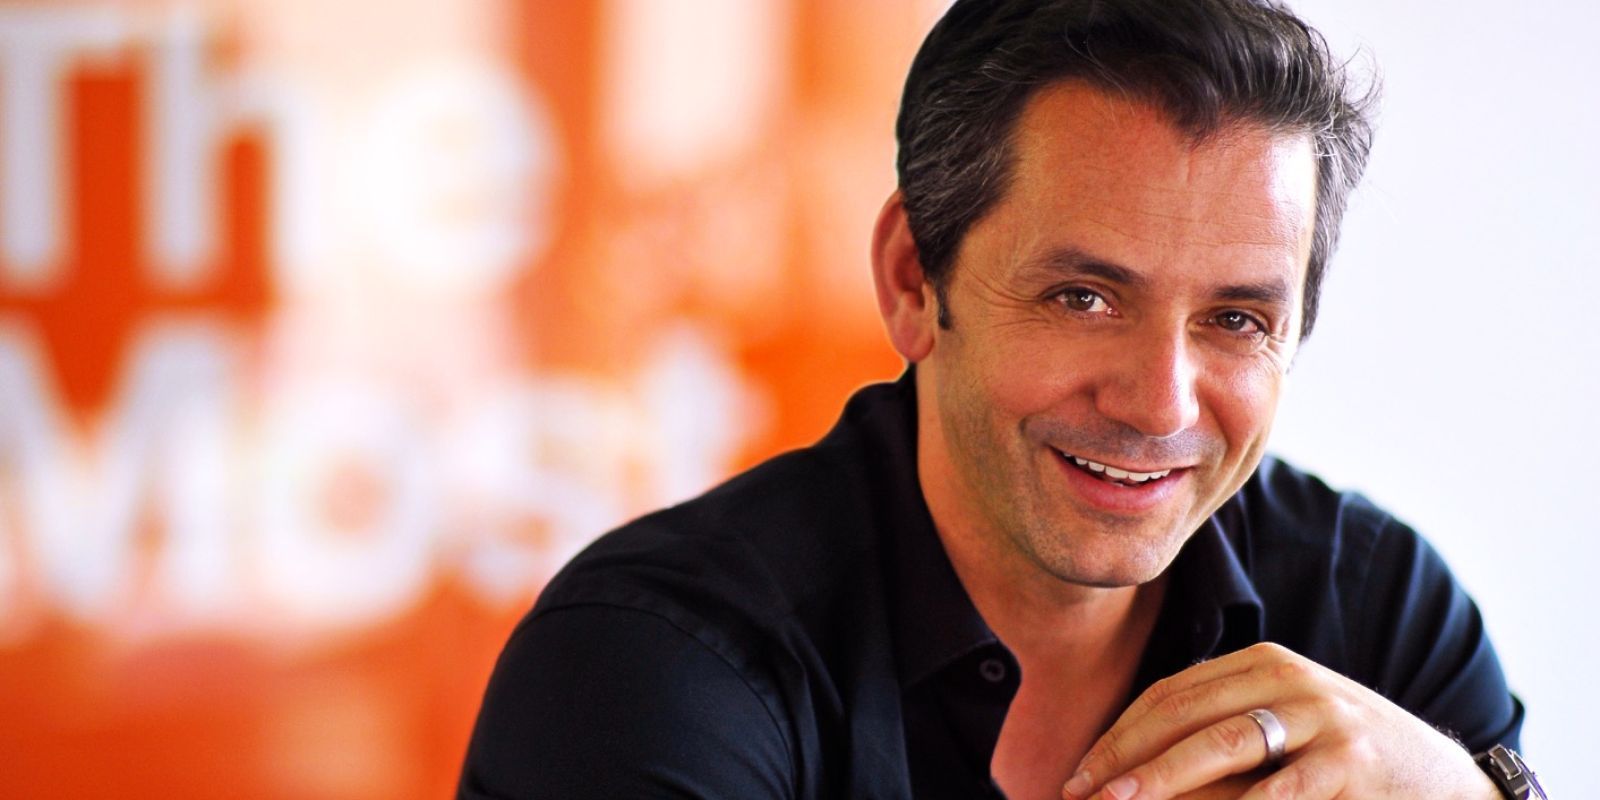 Activision CEO Eric Hirshberg is stepping down in March